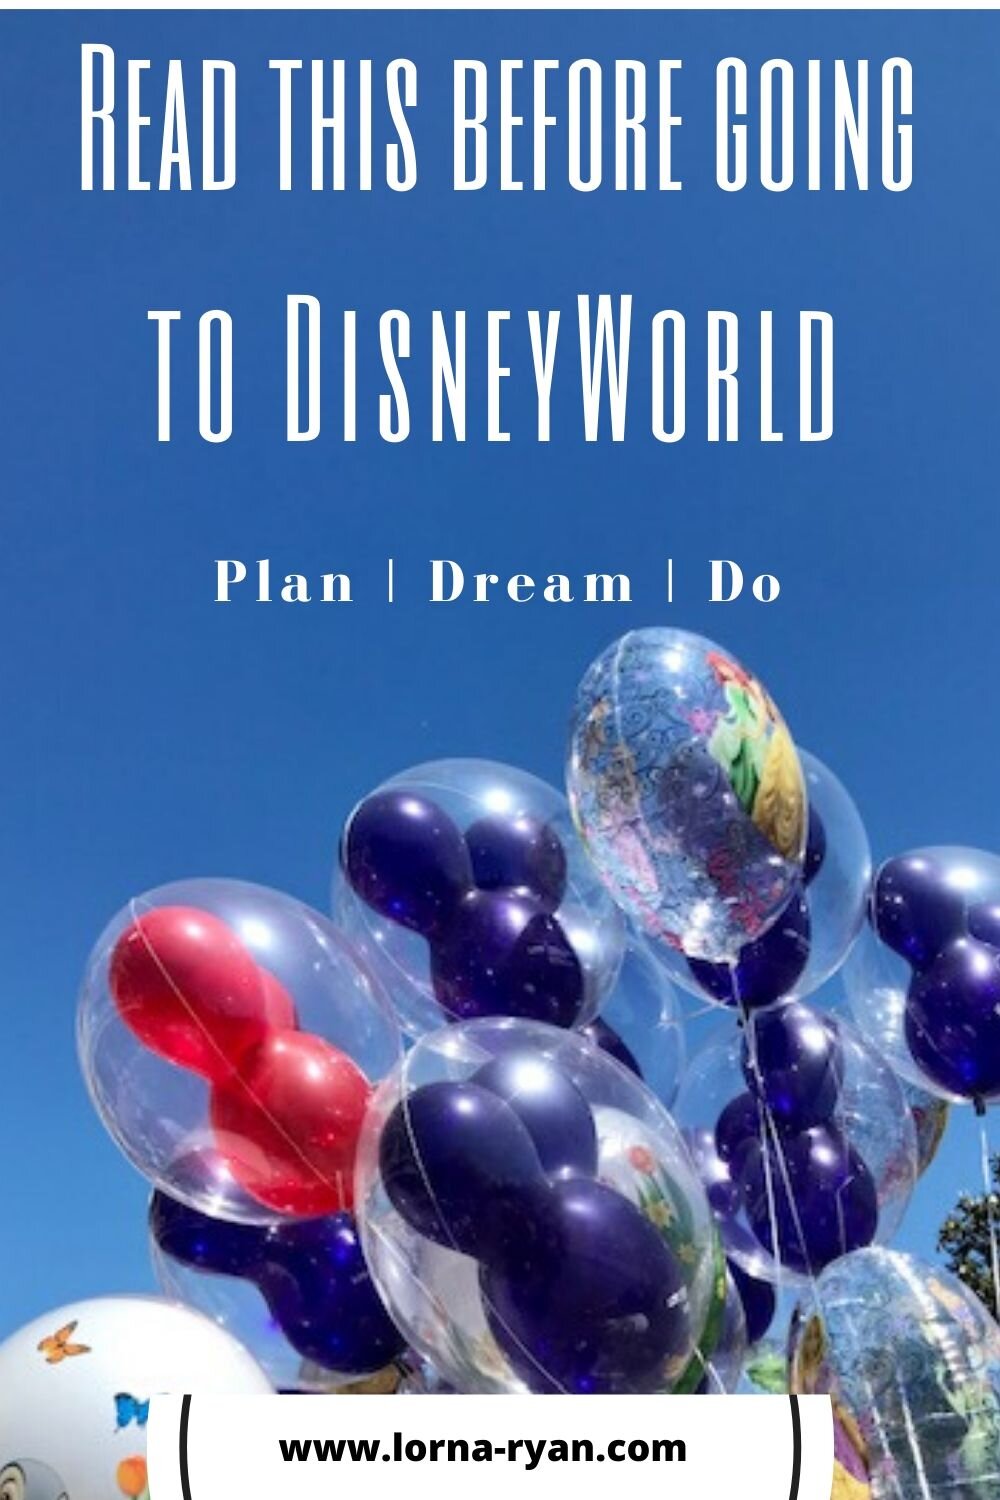 Read before going to Disneyworld. Don't make these Disney World mistakes that most people, especially first-timers, regret. Use these to plan your best trip ever to DisneyWorld. #disney #disneyworld